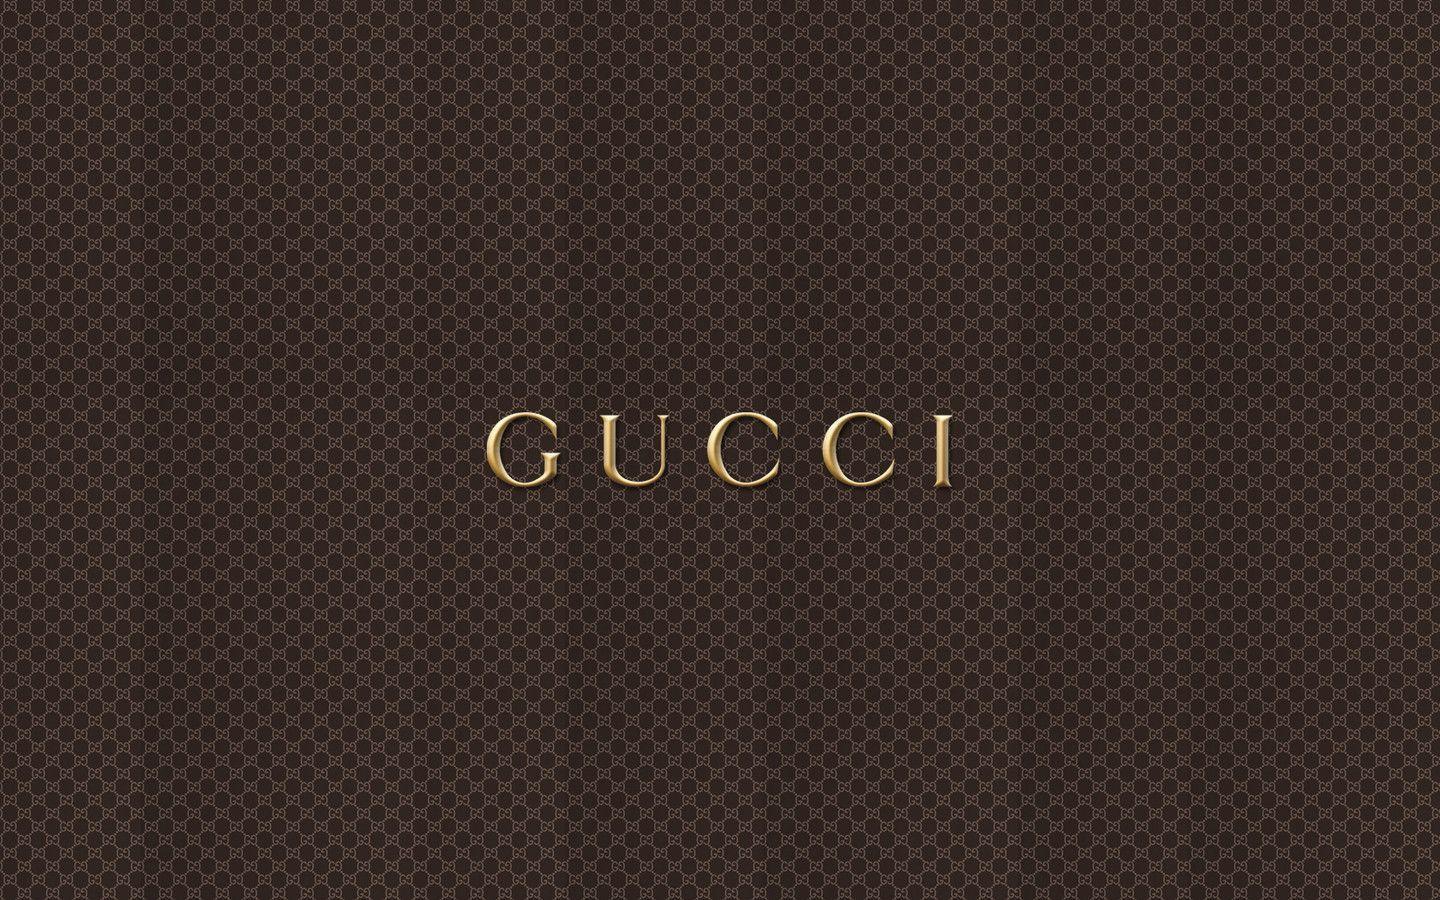 Gucci Logo Wallpapers - Top Free Gucci Logo Backgrounds ...